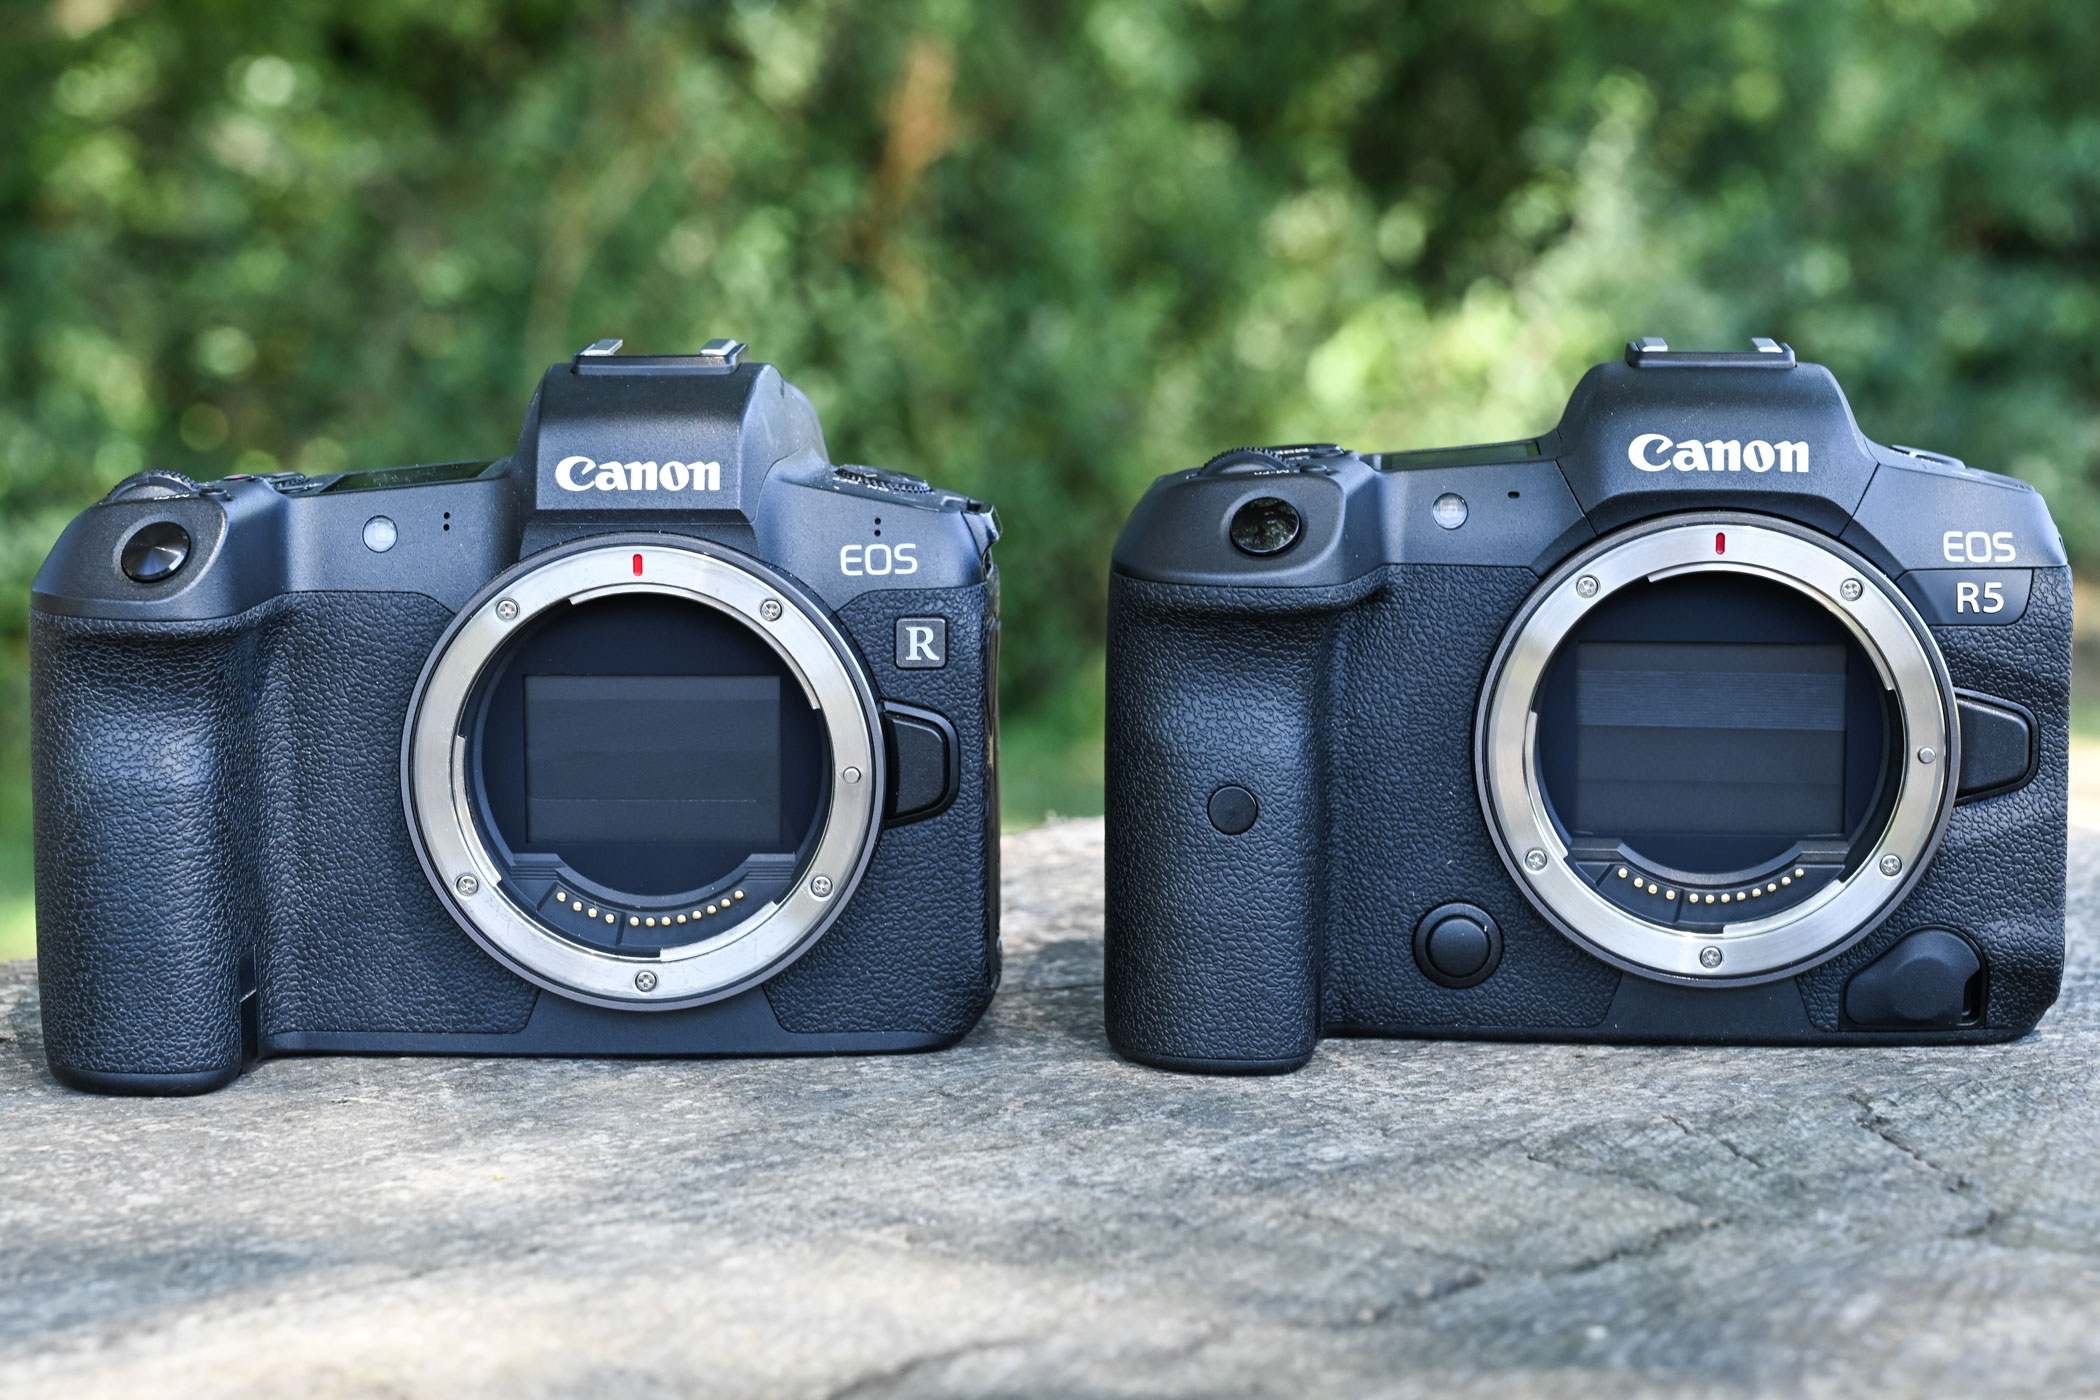 Canon's EOS R5 (right) seeks to address the shortcomings of the original EOS R (left)